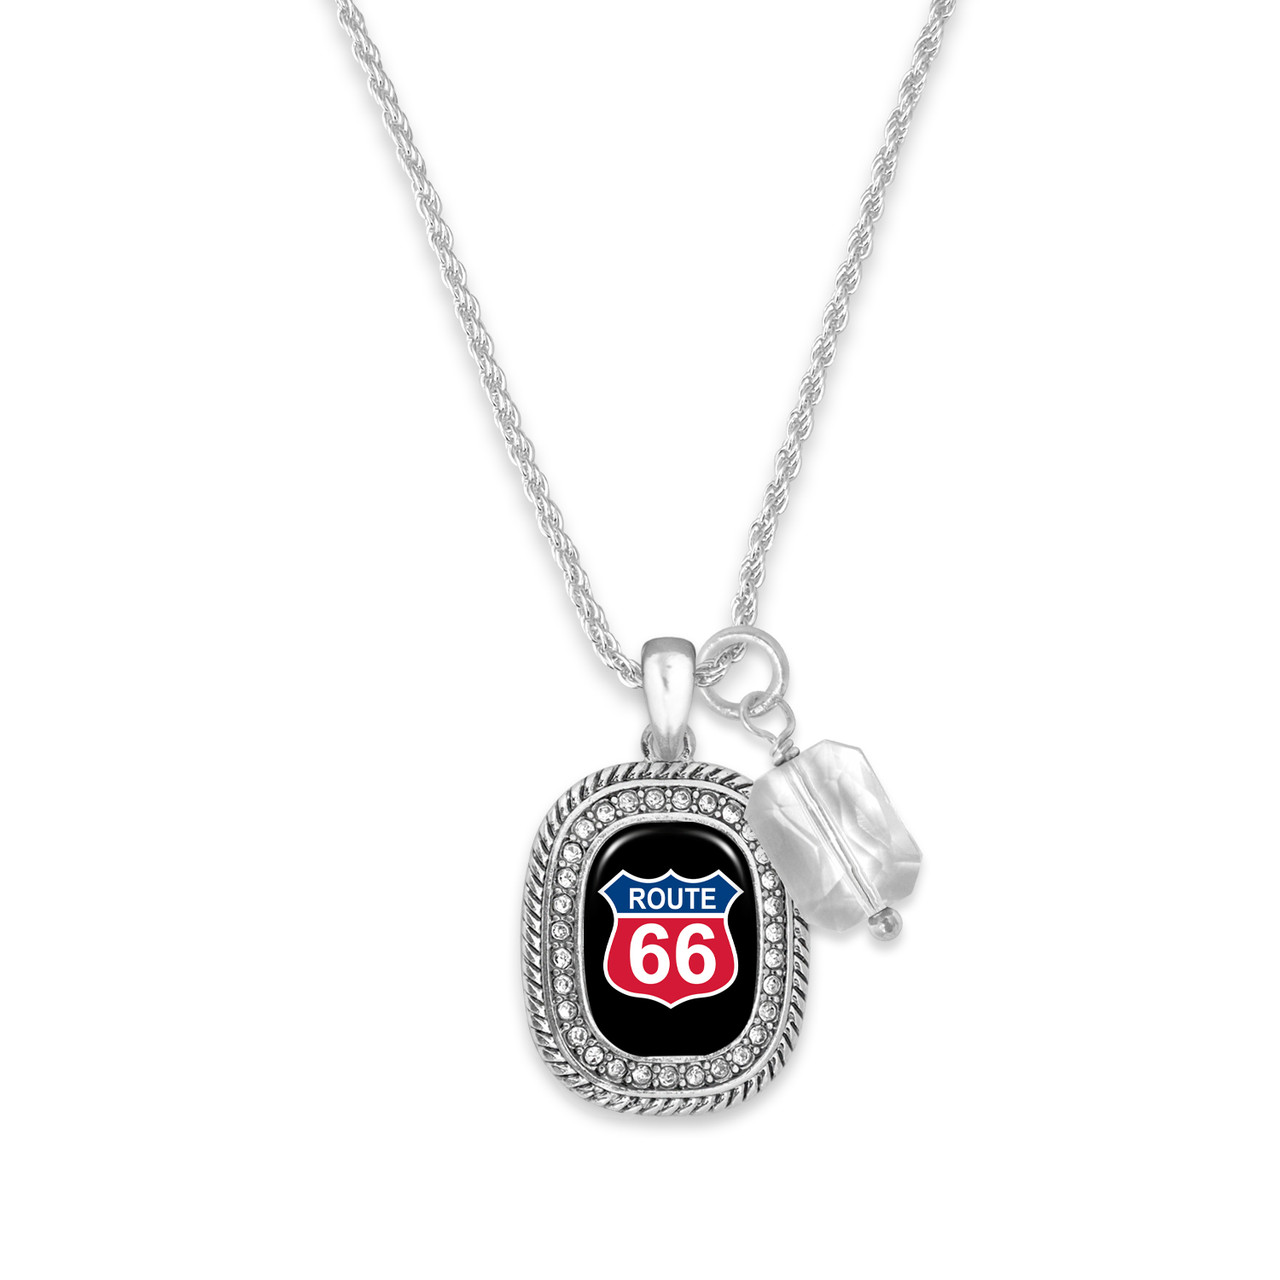 Route 66 Madison Necklace